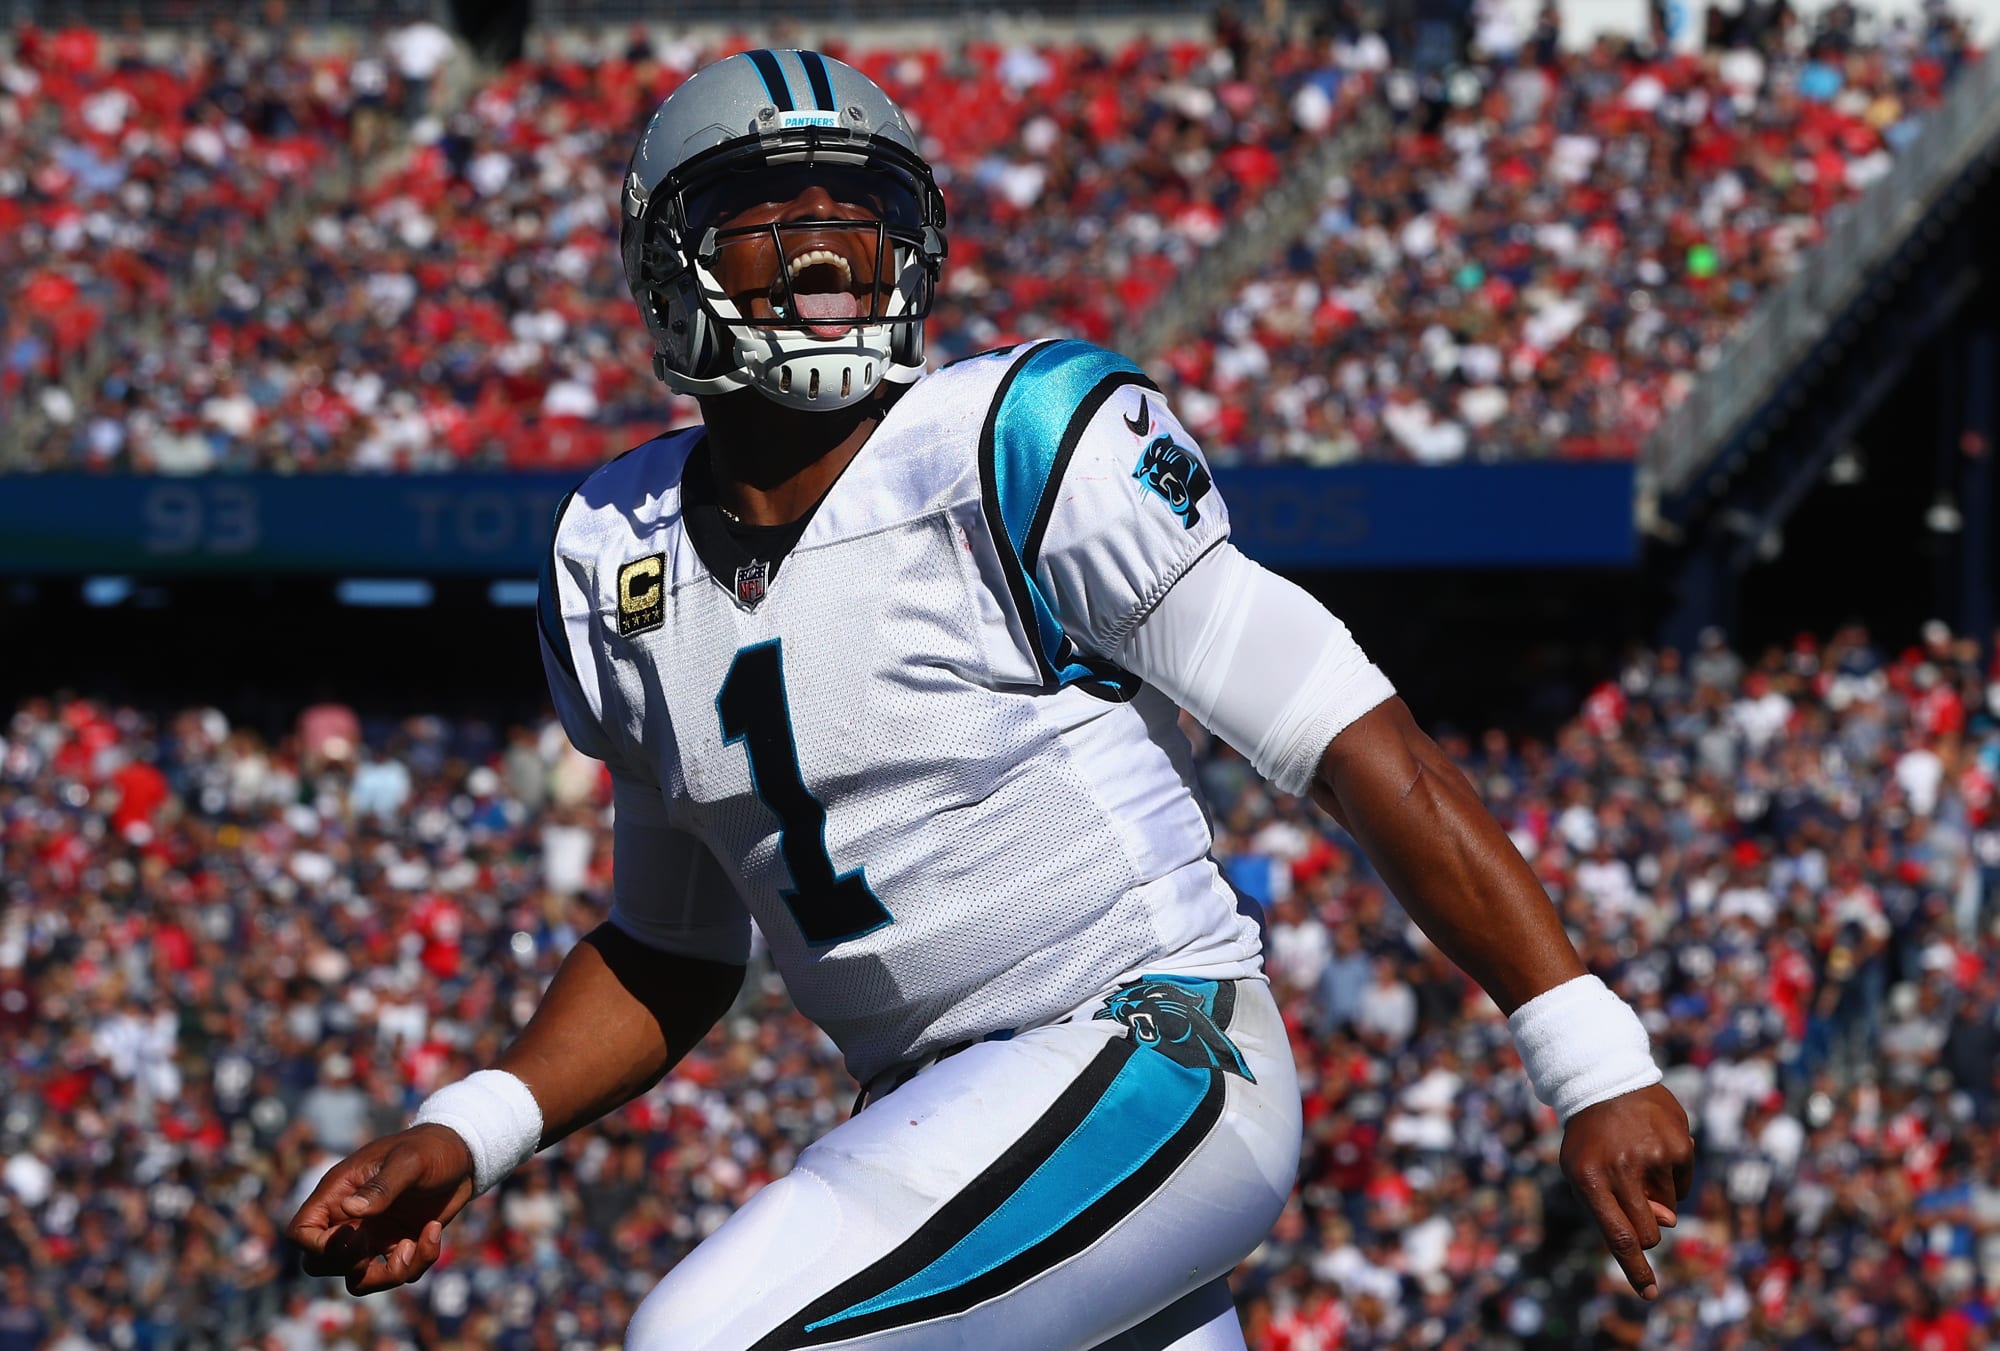 Panthers' Cam Newton in 'super' form in win vs. Lions